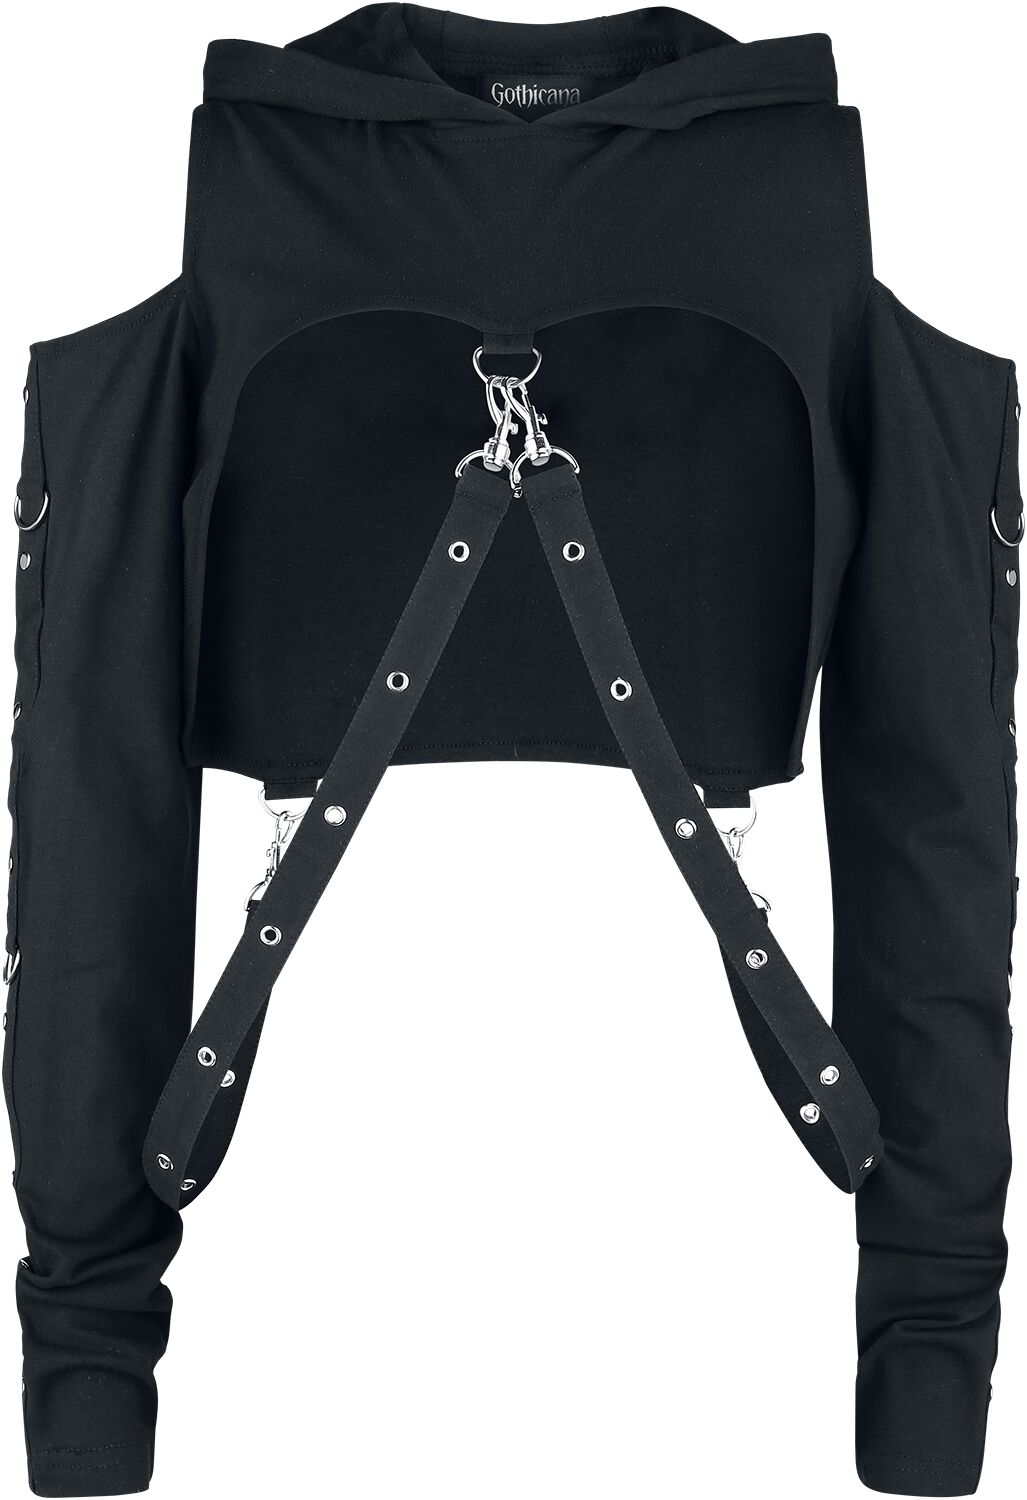 Gothicana by EMP Cropped Hoodie with Straps Hooded sweater black